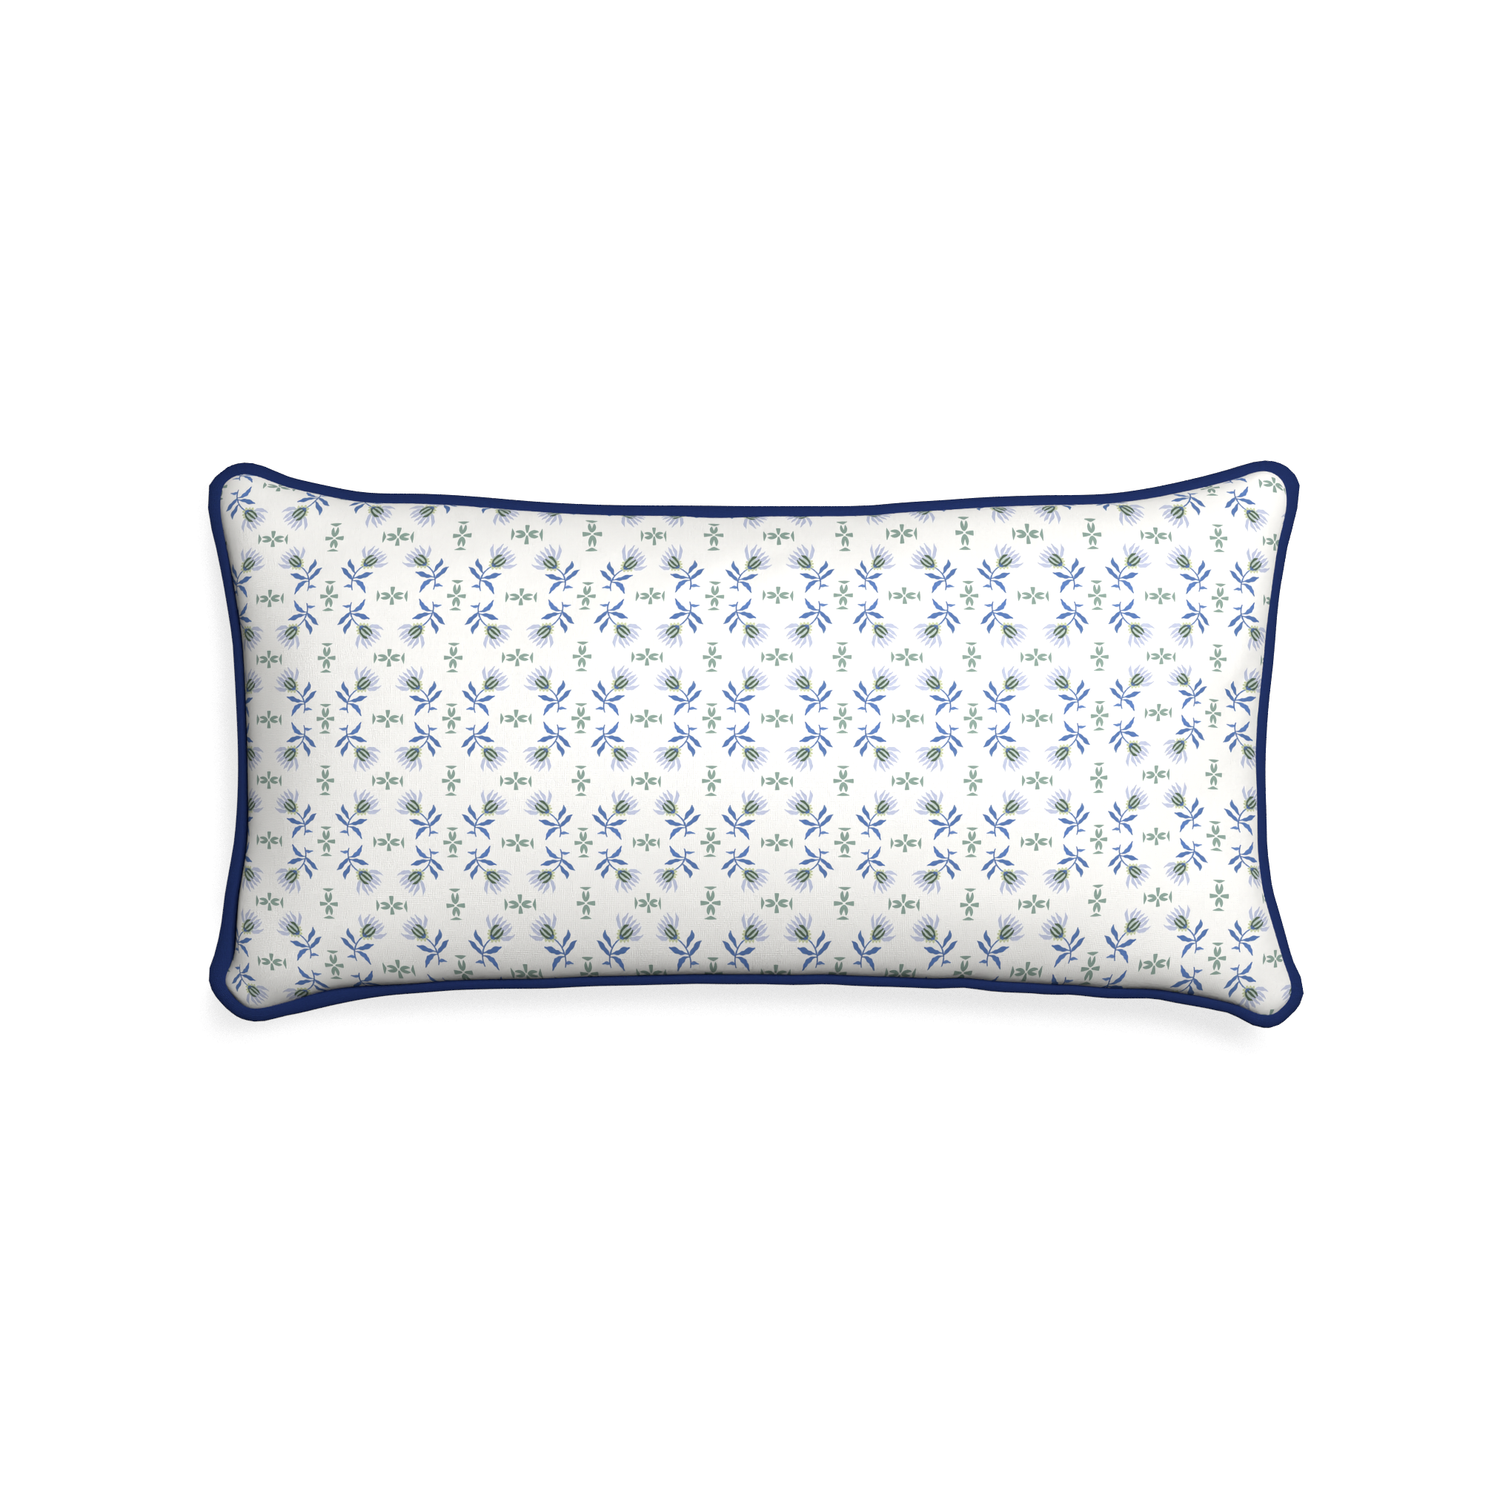 Midi-lumbar lee custom blue & green floralpillow with midnight piping on white background